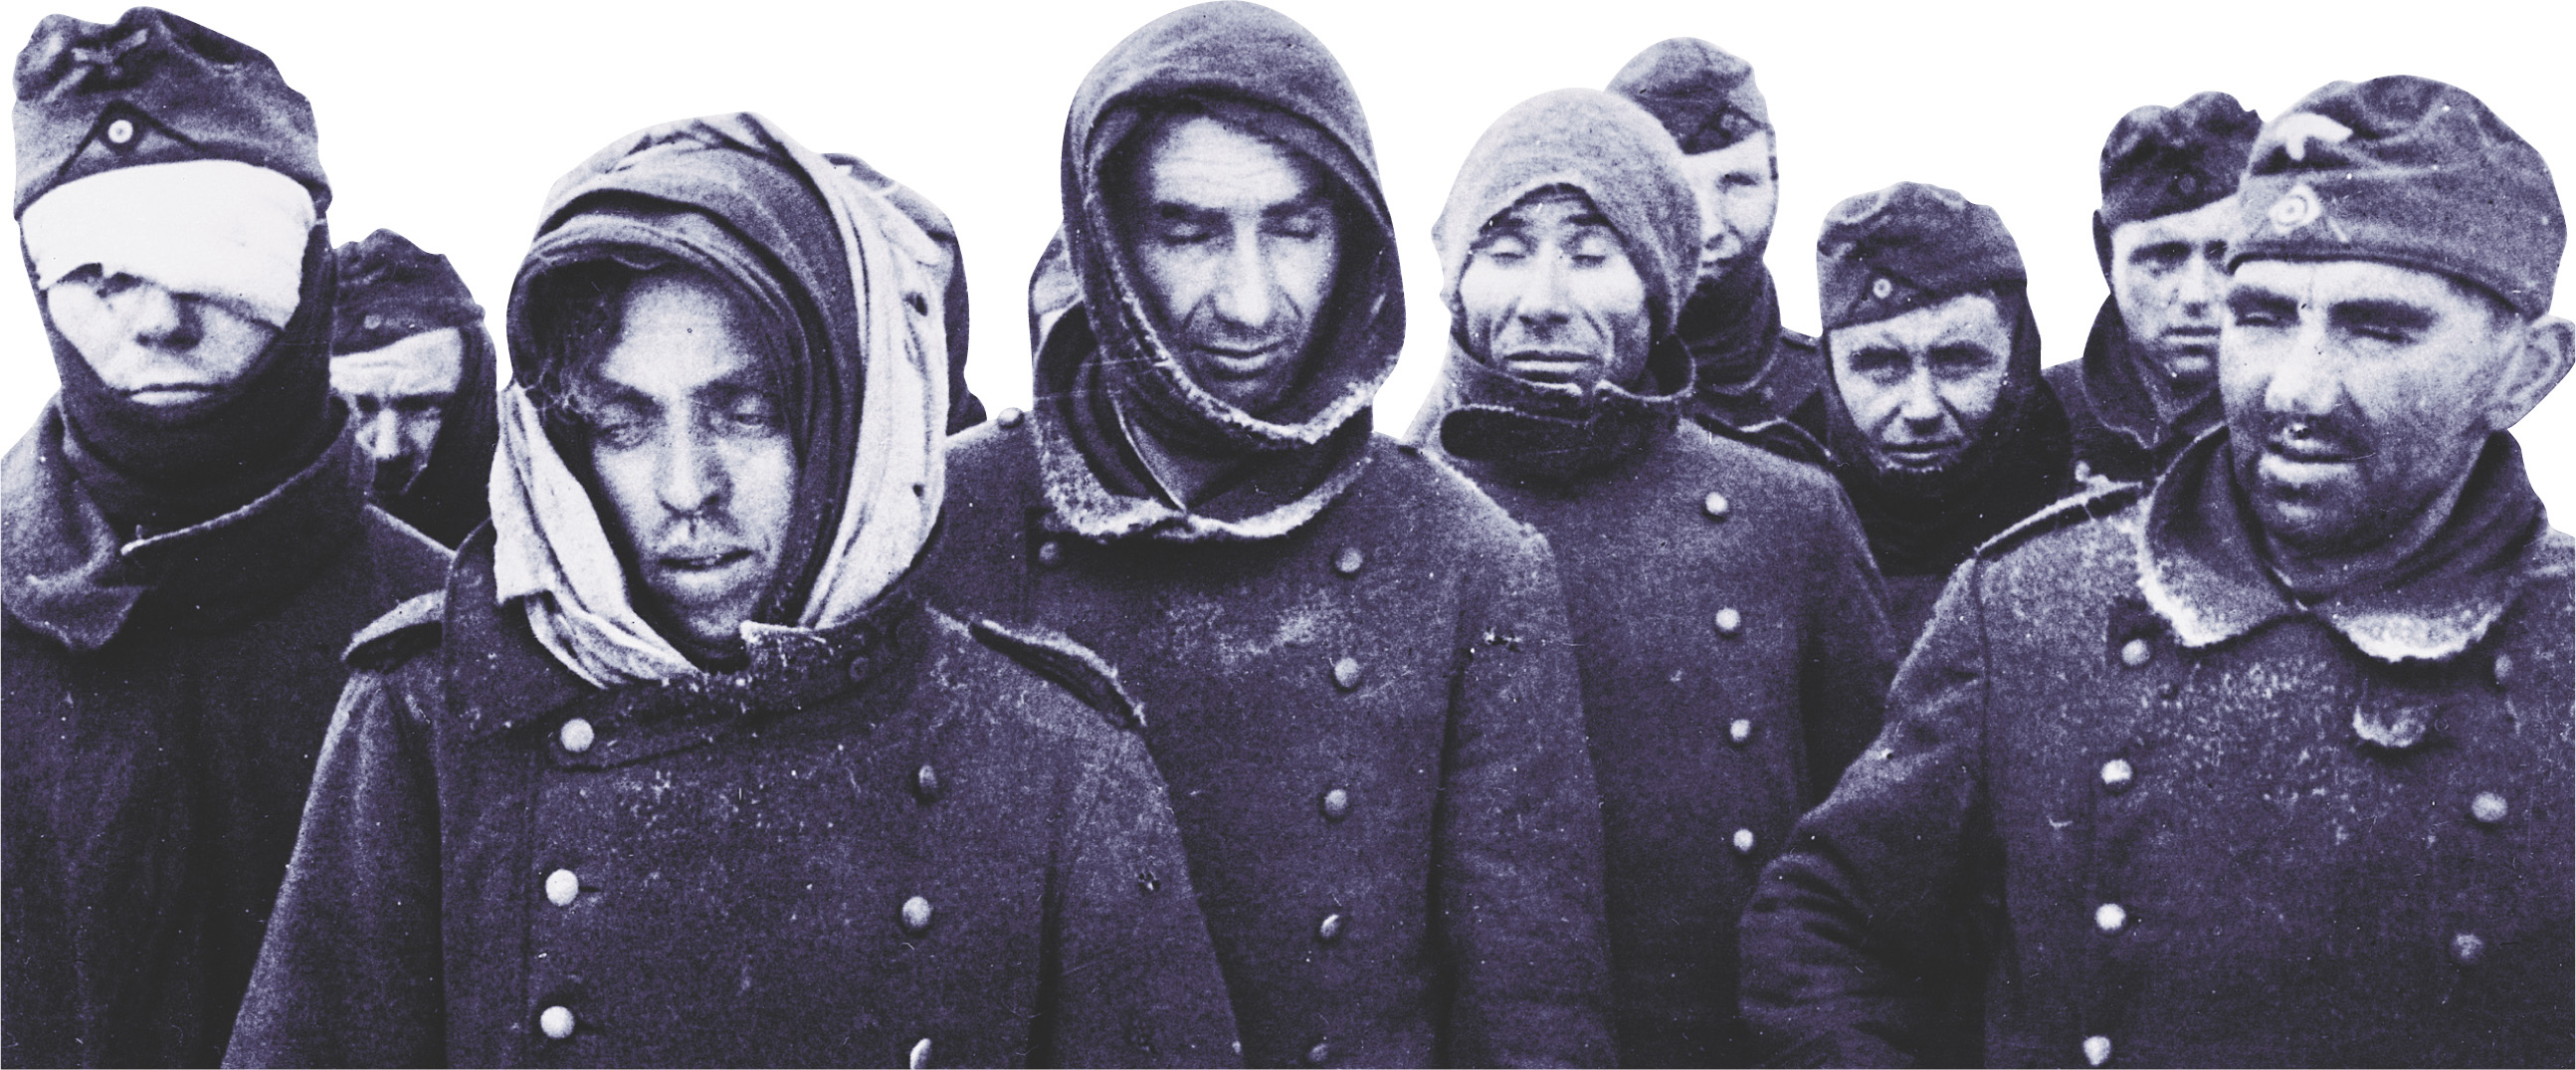 Photo: German soldiers bundled against the snow